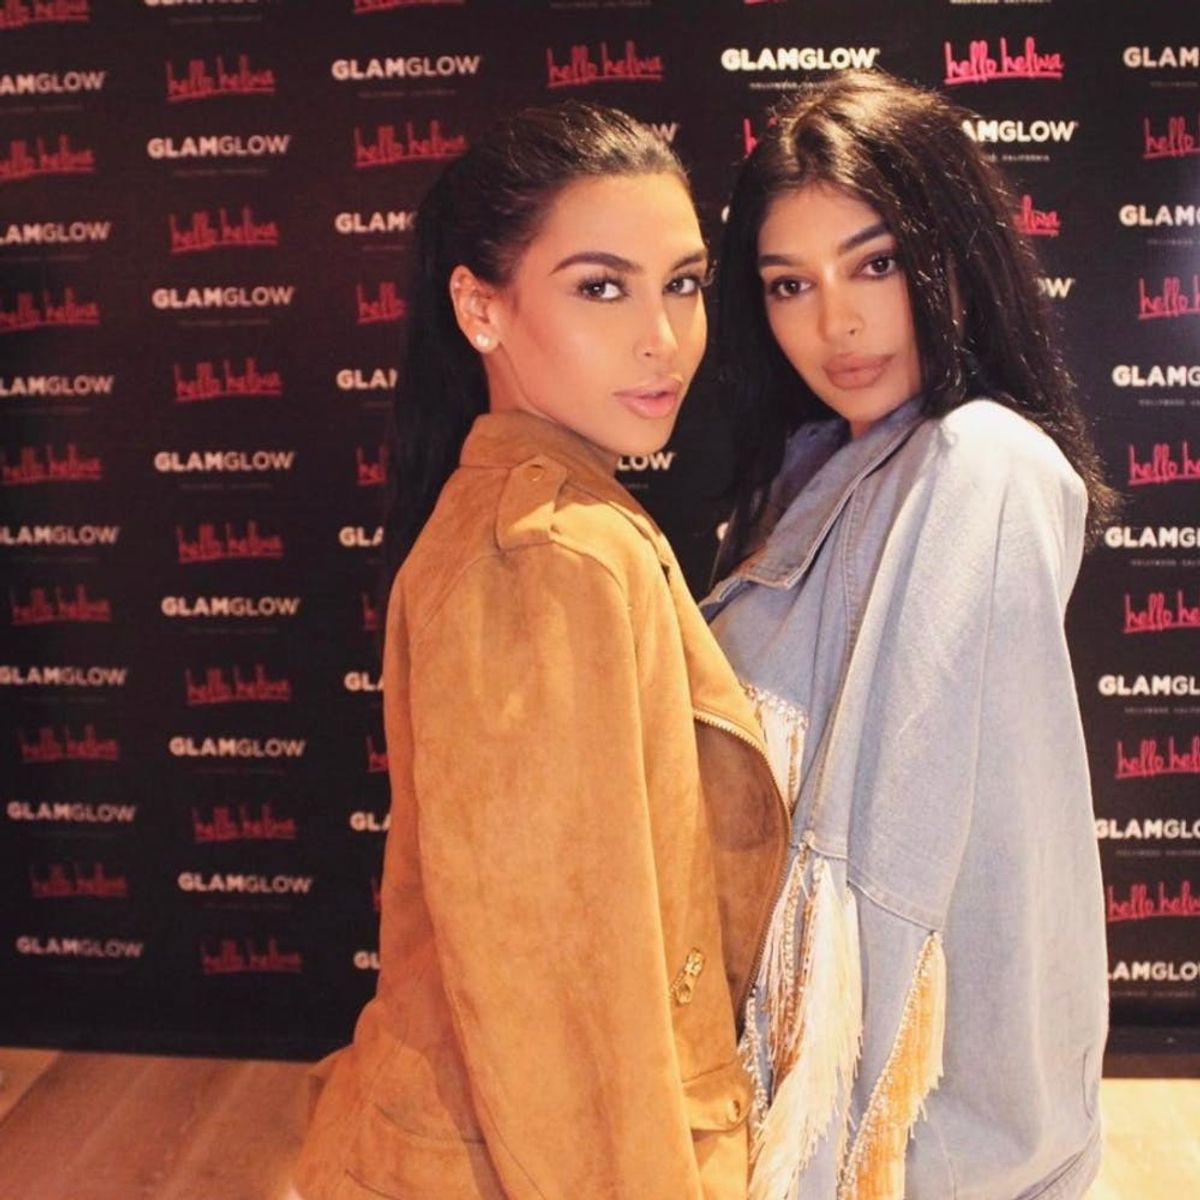 These Beauty Blogger Sisters Look So Much Like Kim Kardashian and Kylie Jenner, It’s Eerie